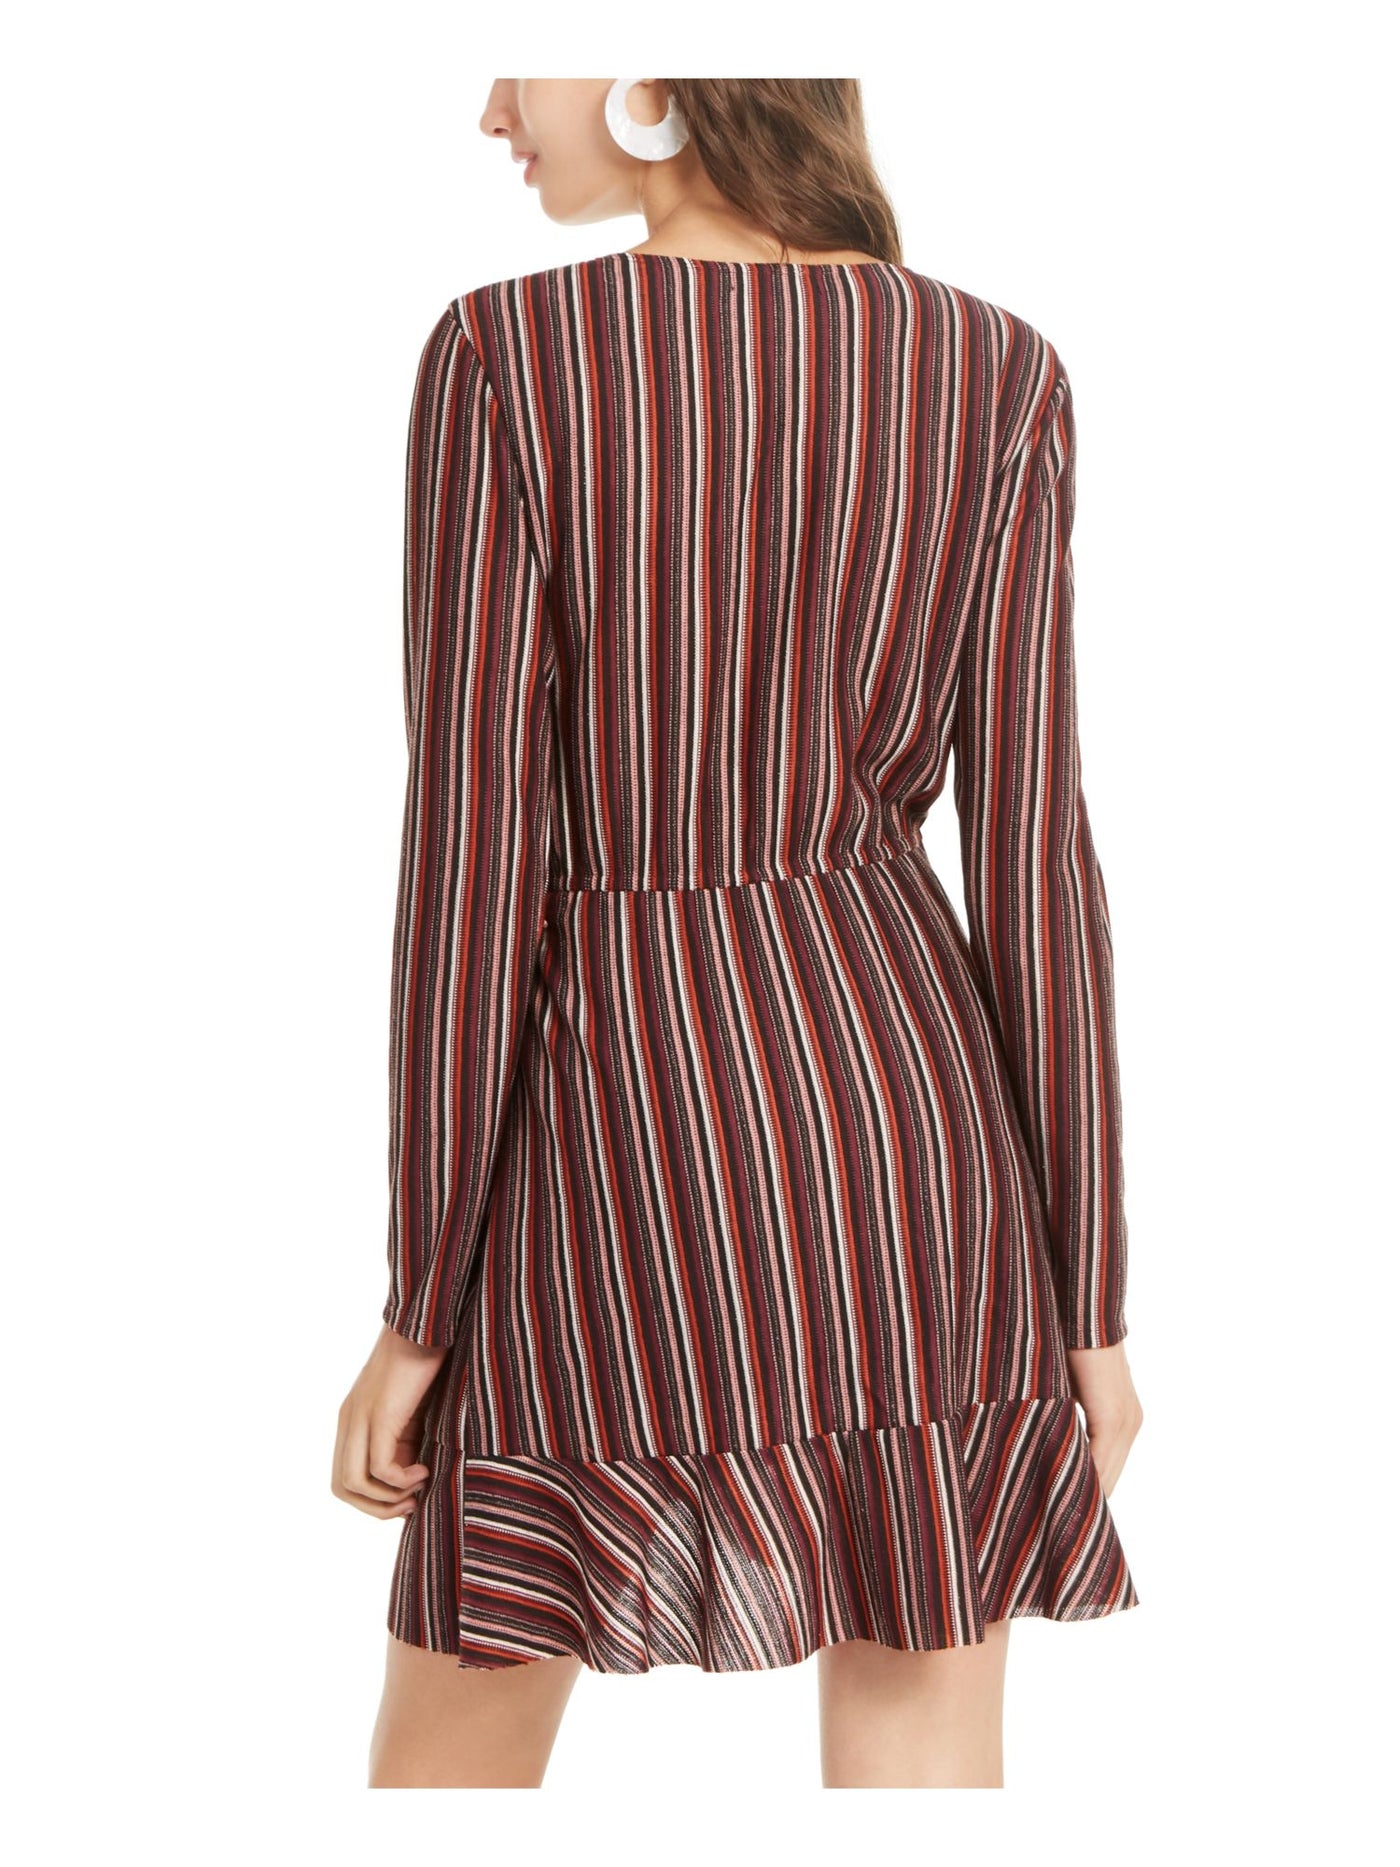 CRYSTAL DOLLS Womens Brown Belted Striped Long Sleeve Short Wrap Dress Juniors S